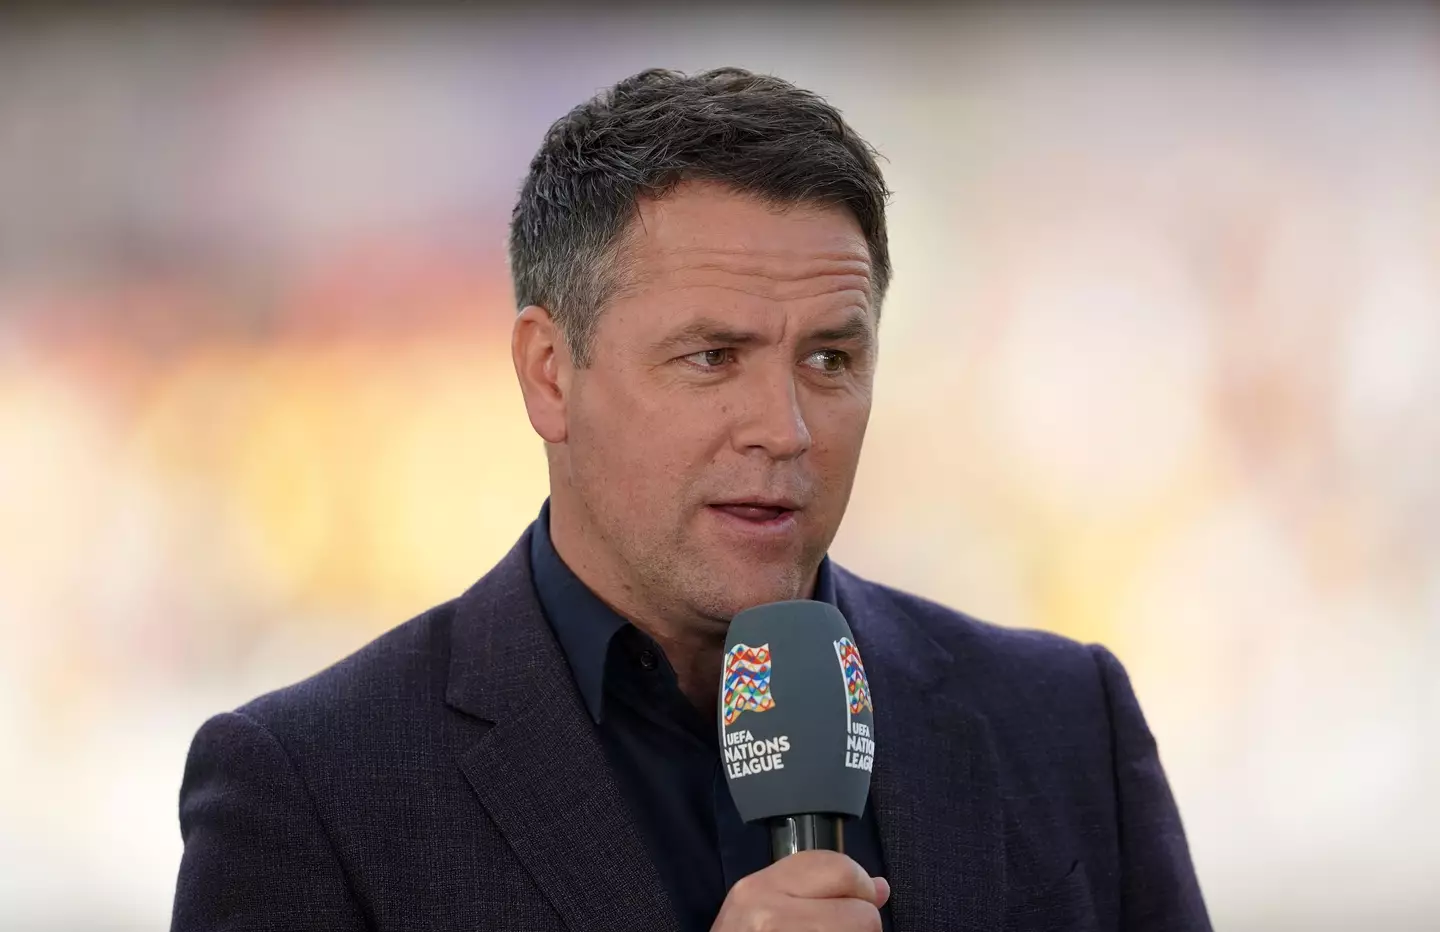 Michael Owen has been part of Channel 4's punditry team for the Nations League.